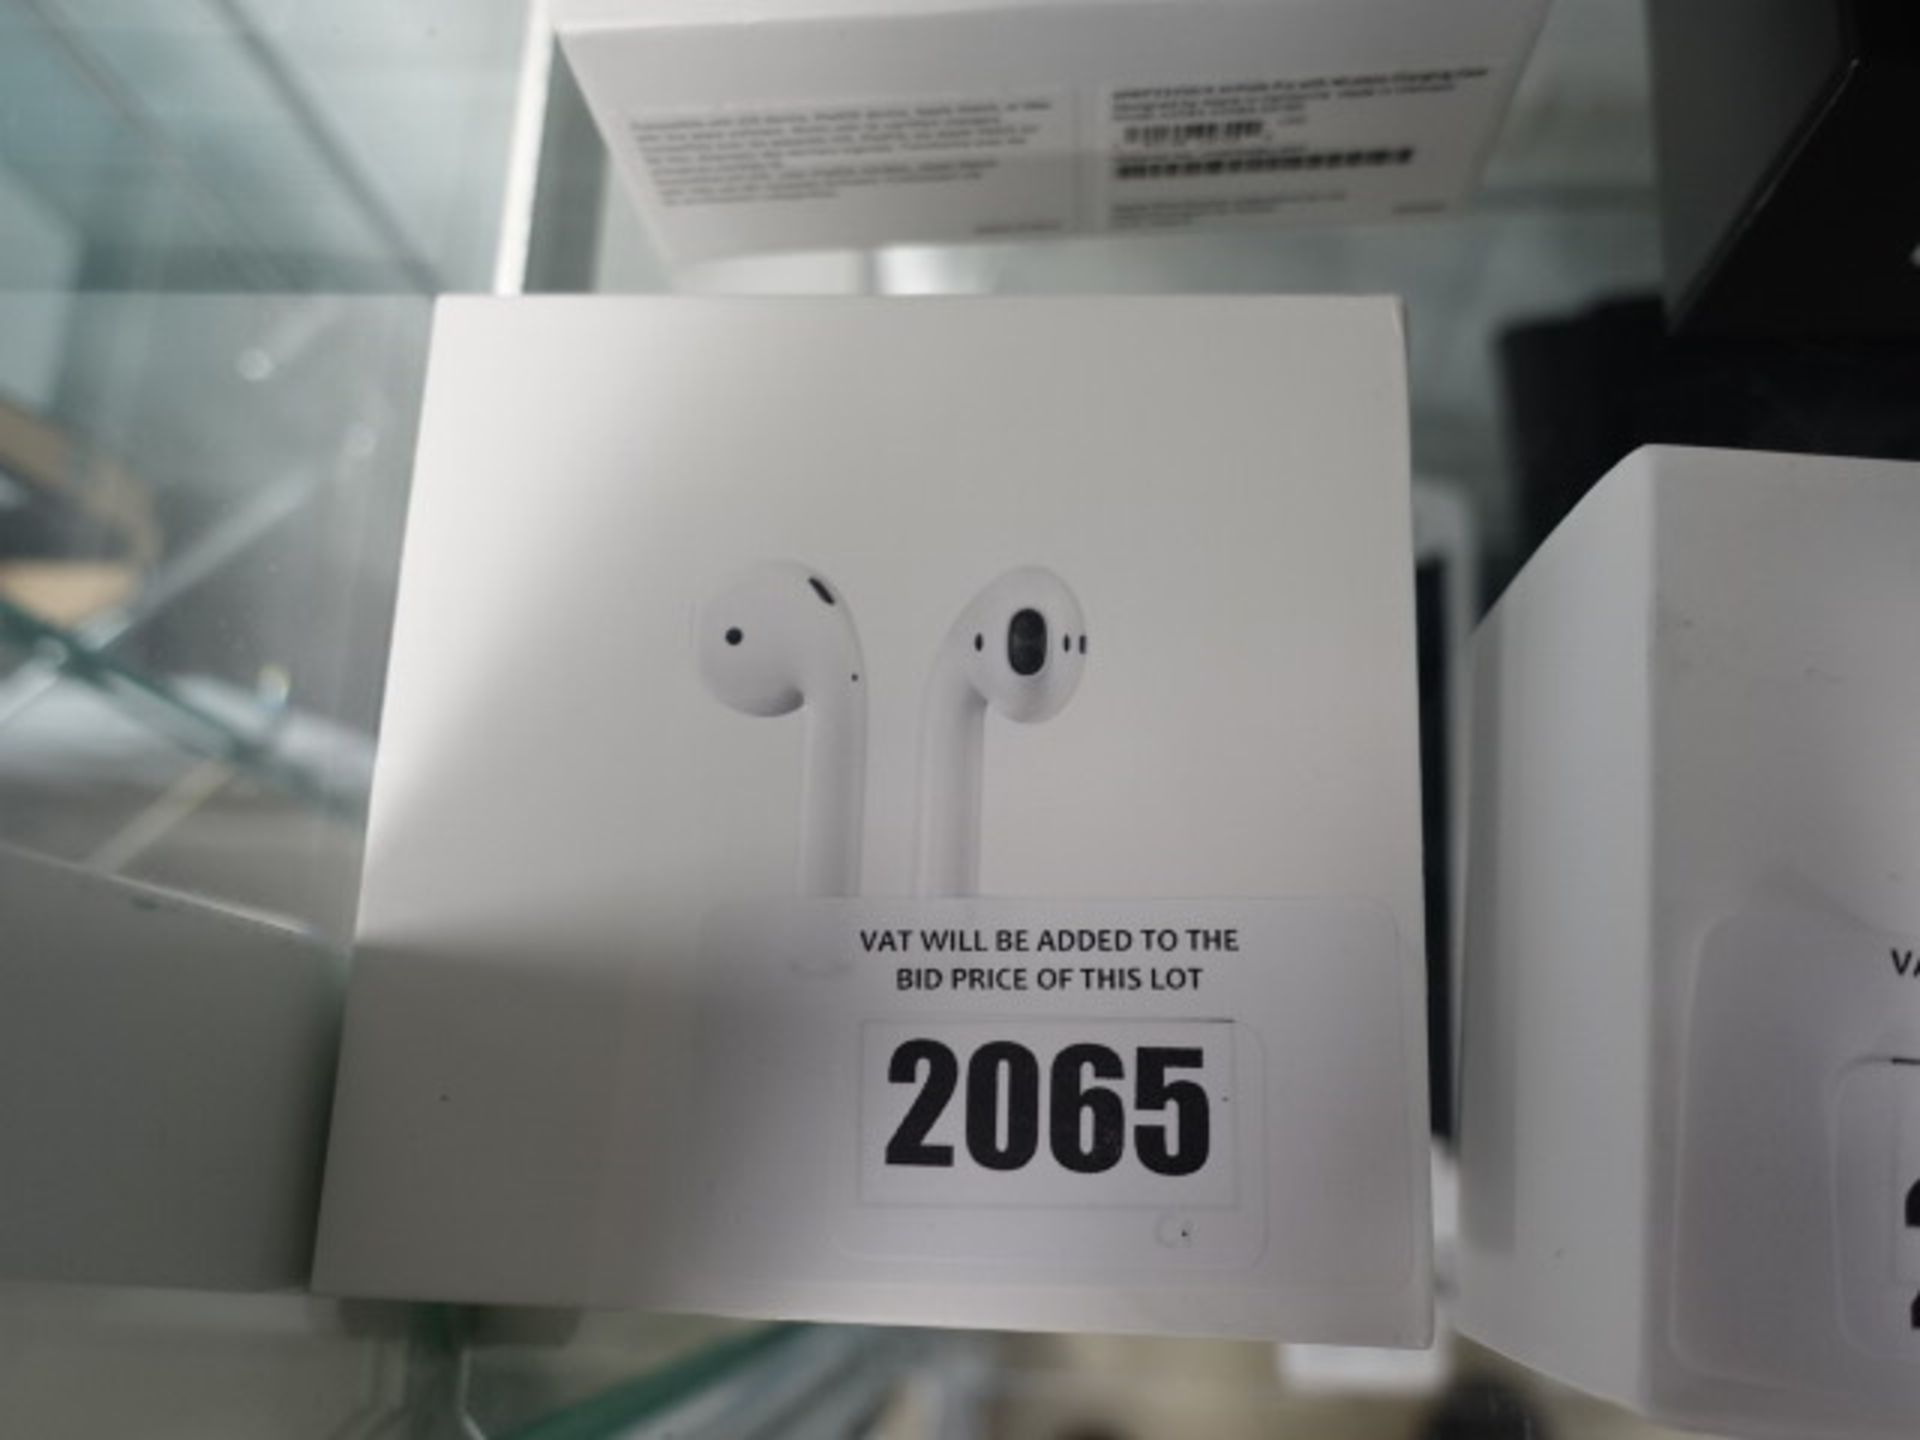 Apple airpods with charging case and box